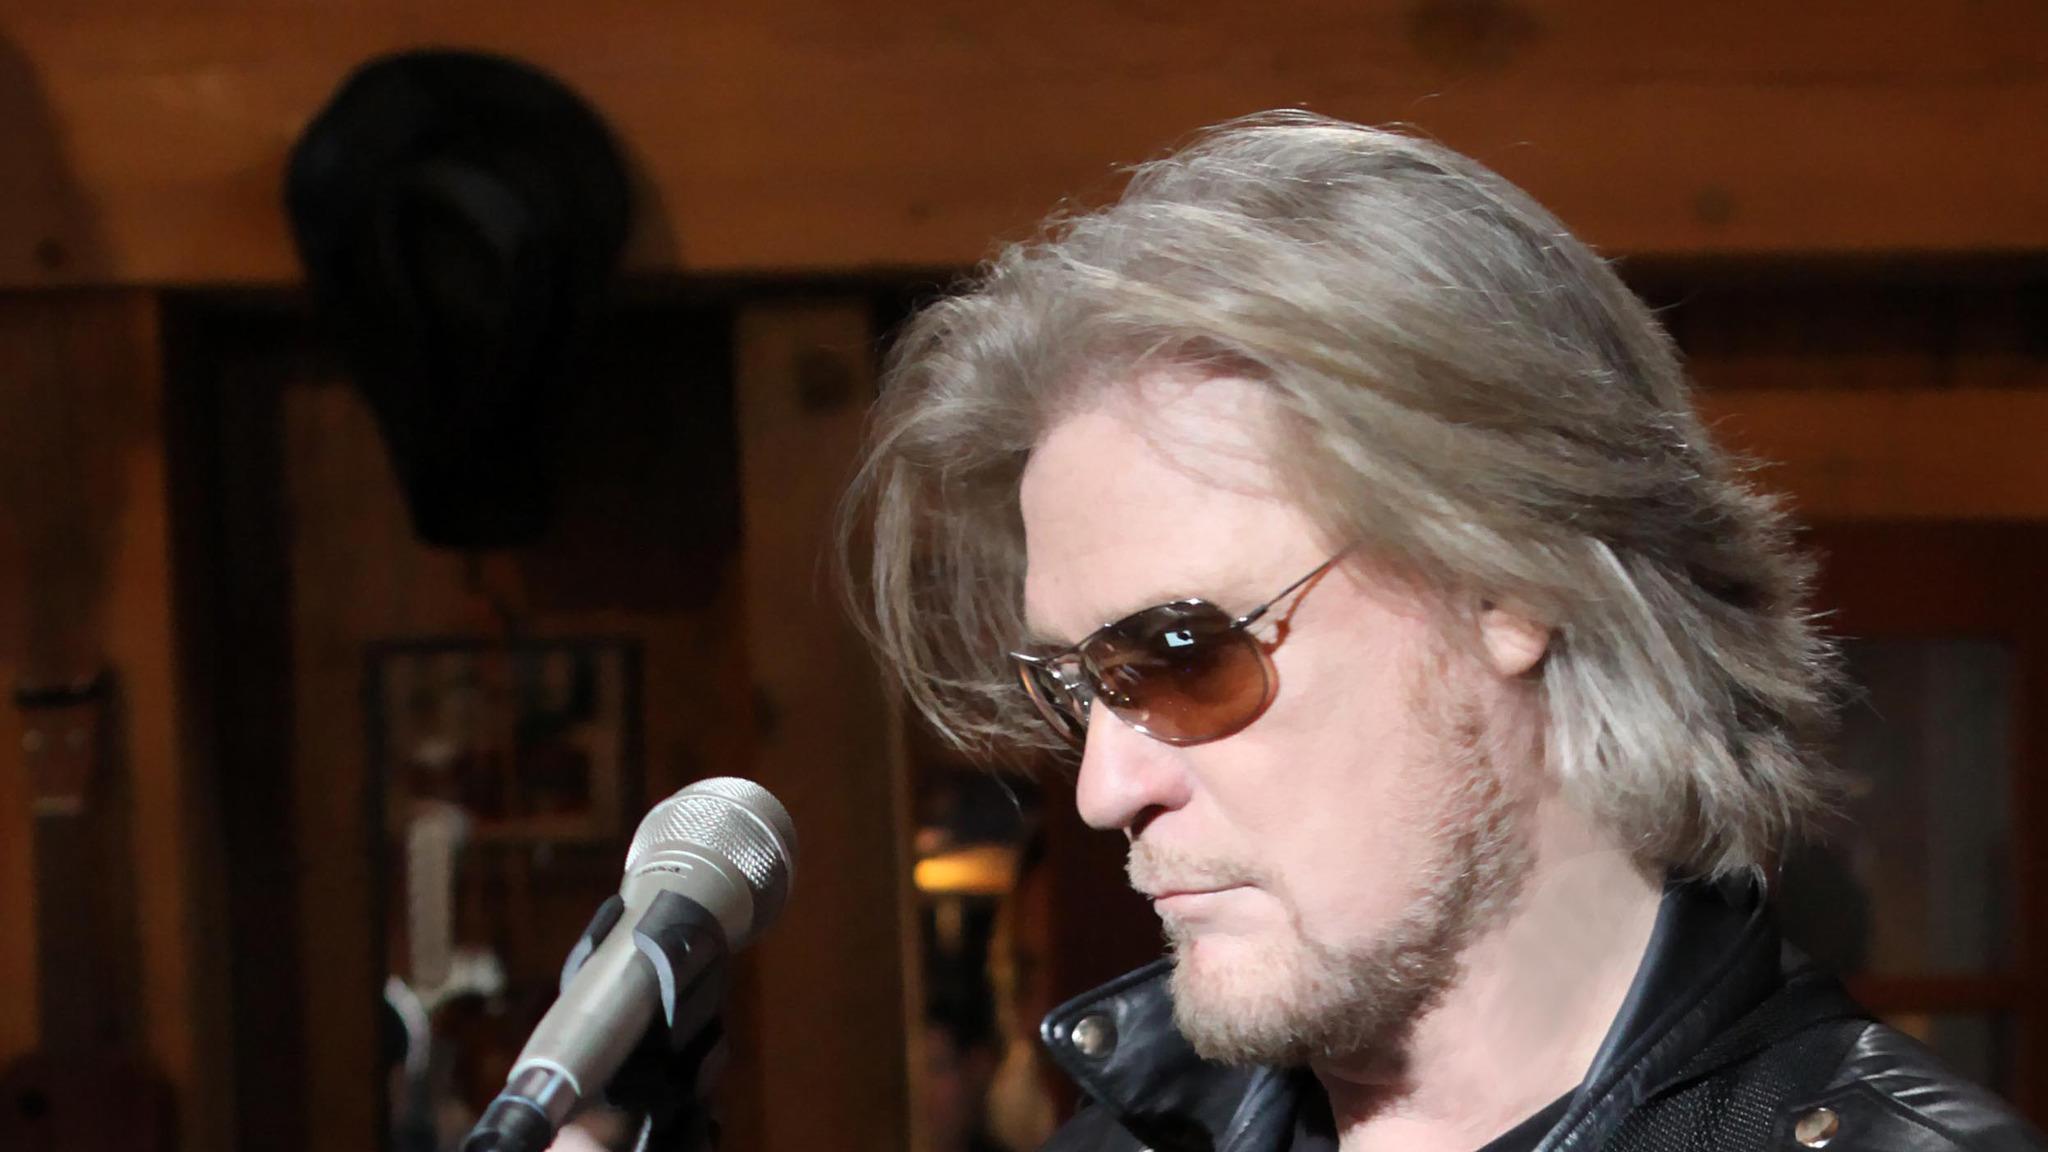 Daryl Hall and the Daryl's House Band with Special Guest Todd Rundgren presale password for legit tickets in Ledyard